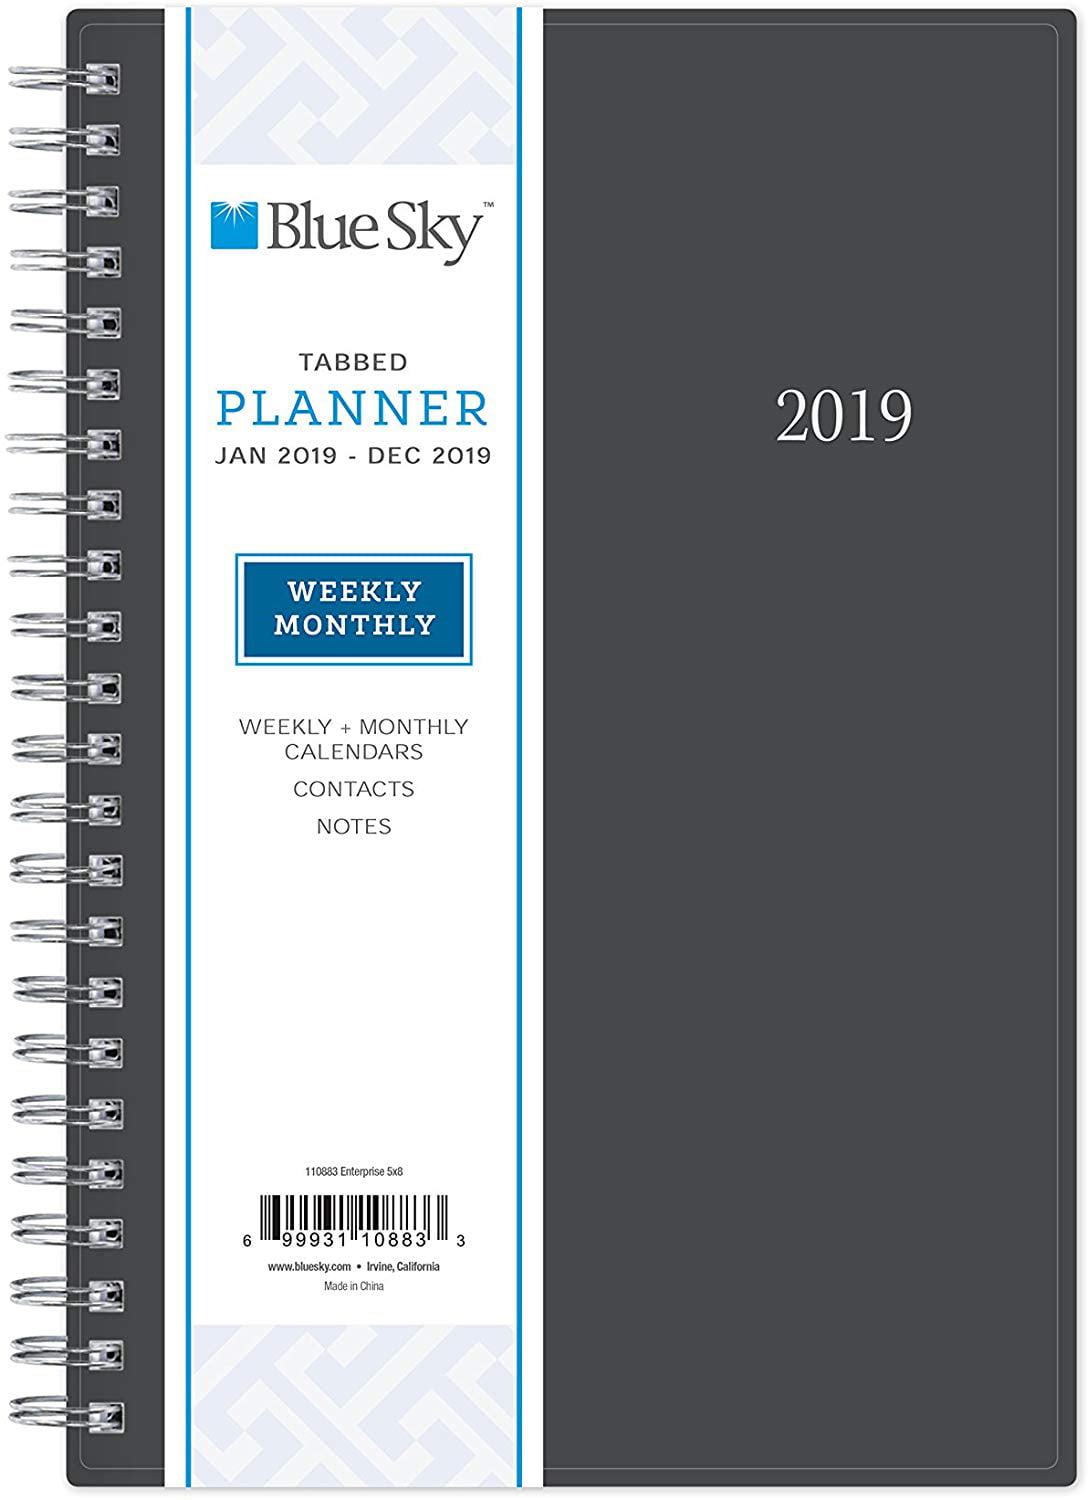 Simple Design Inspires Productivity Twin-Wire Binding 8.5 x 11.5 Hourly Appointment Book with Flexible Cover Inamio 2019 Weekly Planner and Monthly Planner 